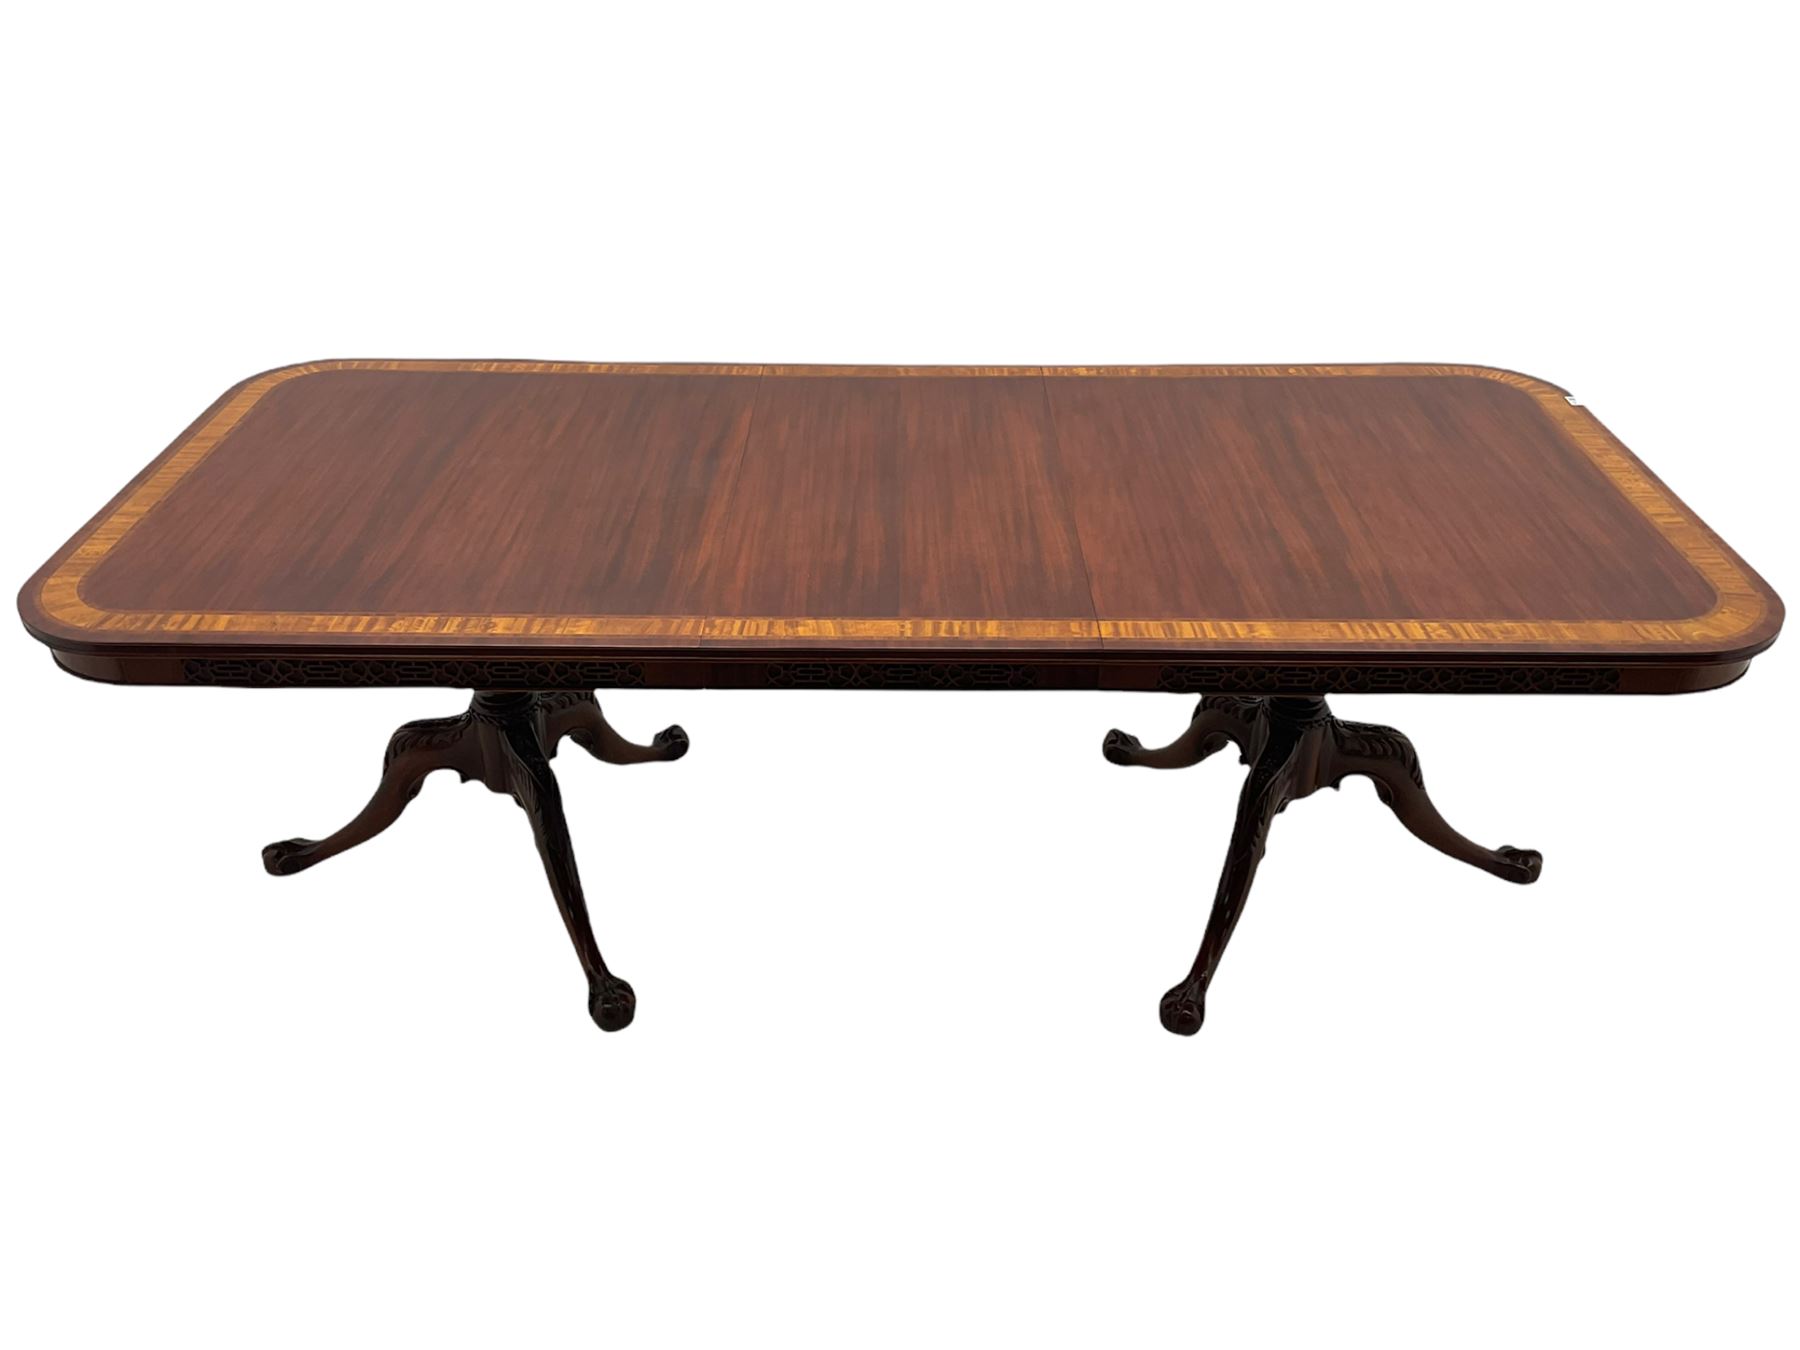 Wade Georgian style mahogany extending dining table with leaf - Image 3 of 27